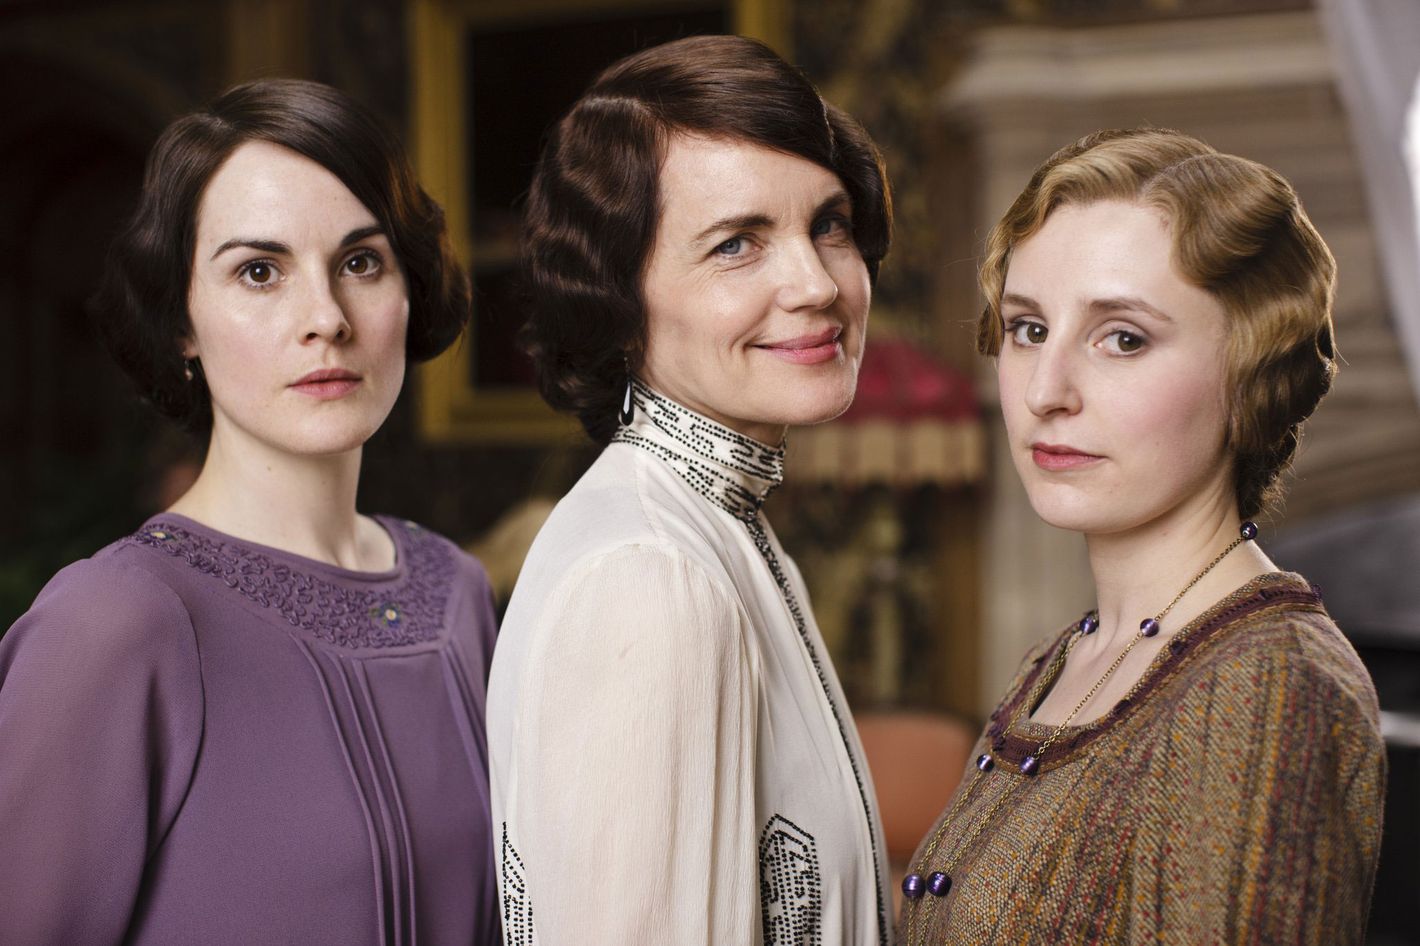 Q&A: Downton's Costume Designer on the Early Jazz-Age Fashion of